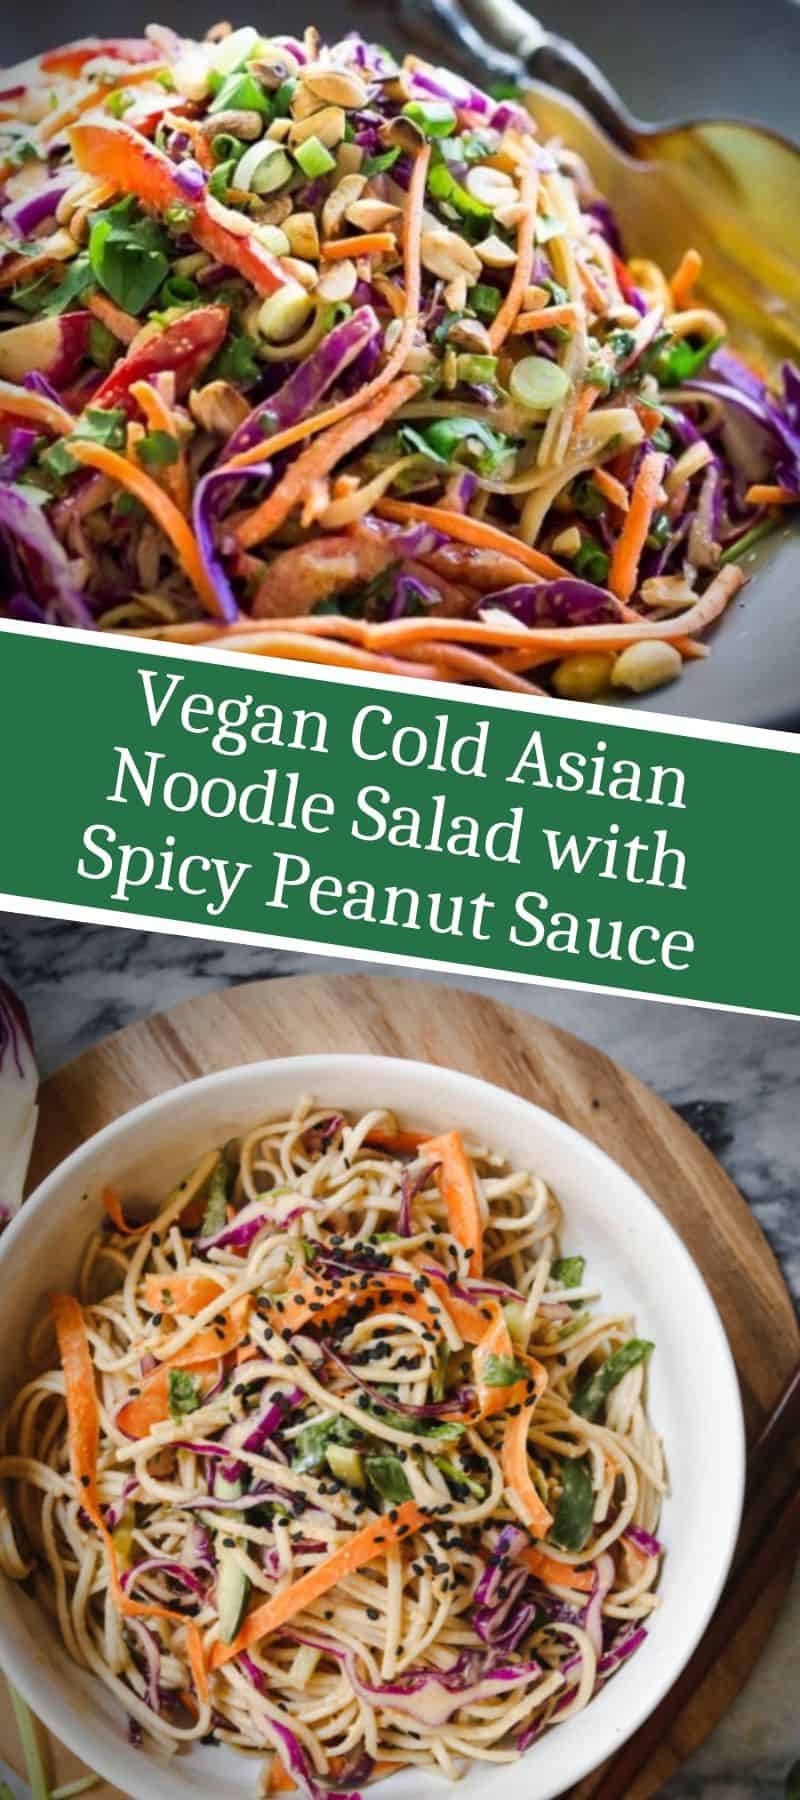 Vegan Cold Asian Noodle Salad with Spicy Peanut Sauce 3